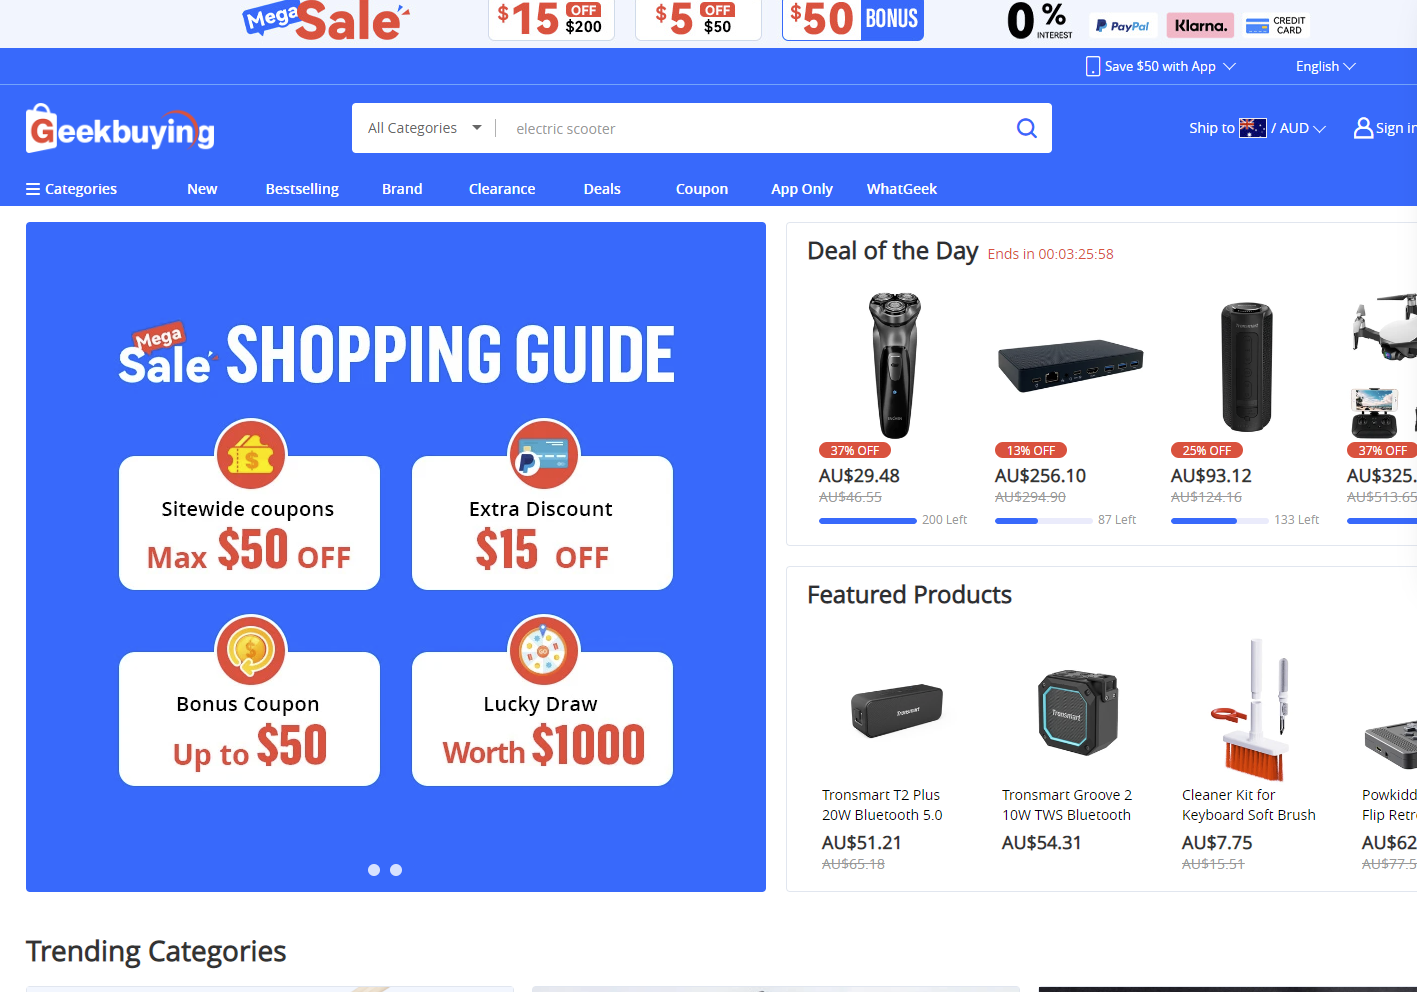 GeekBuying.com – A safe, secure online shopping outlet